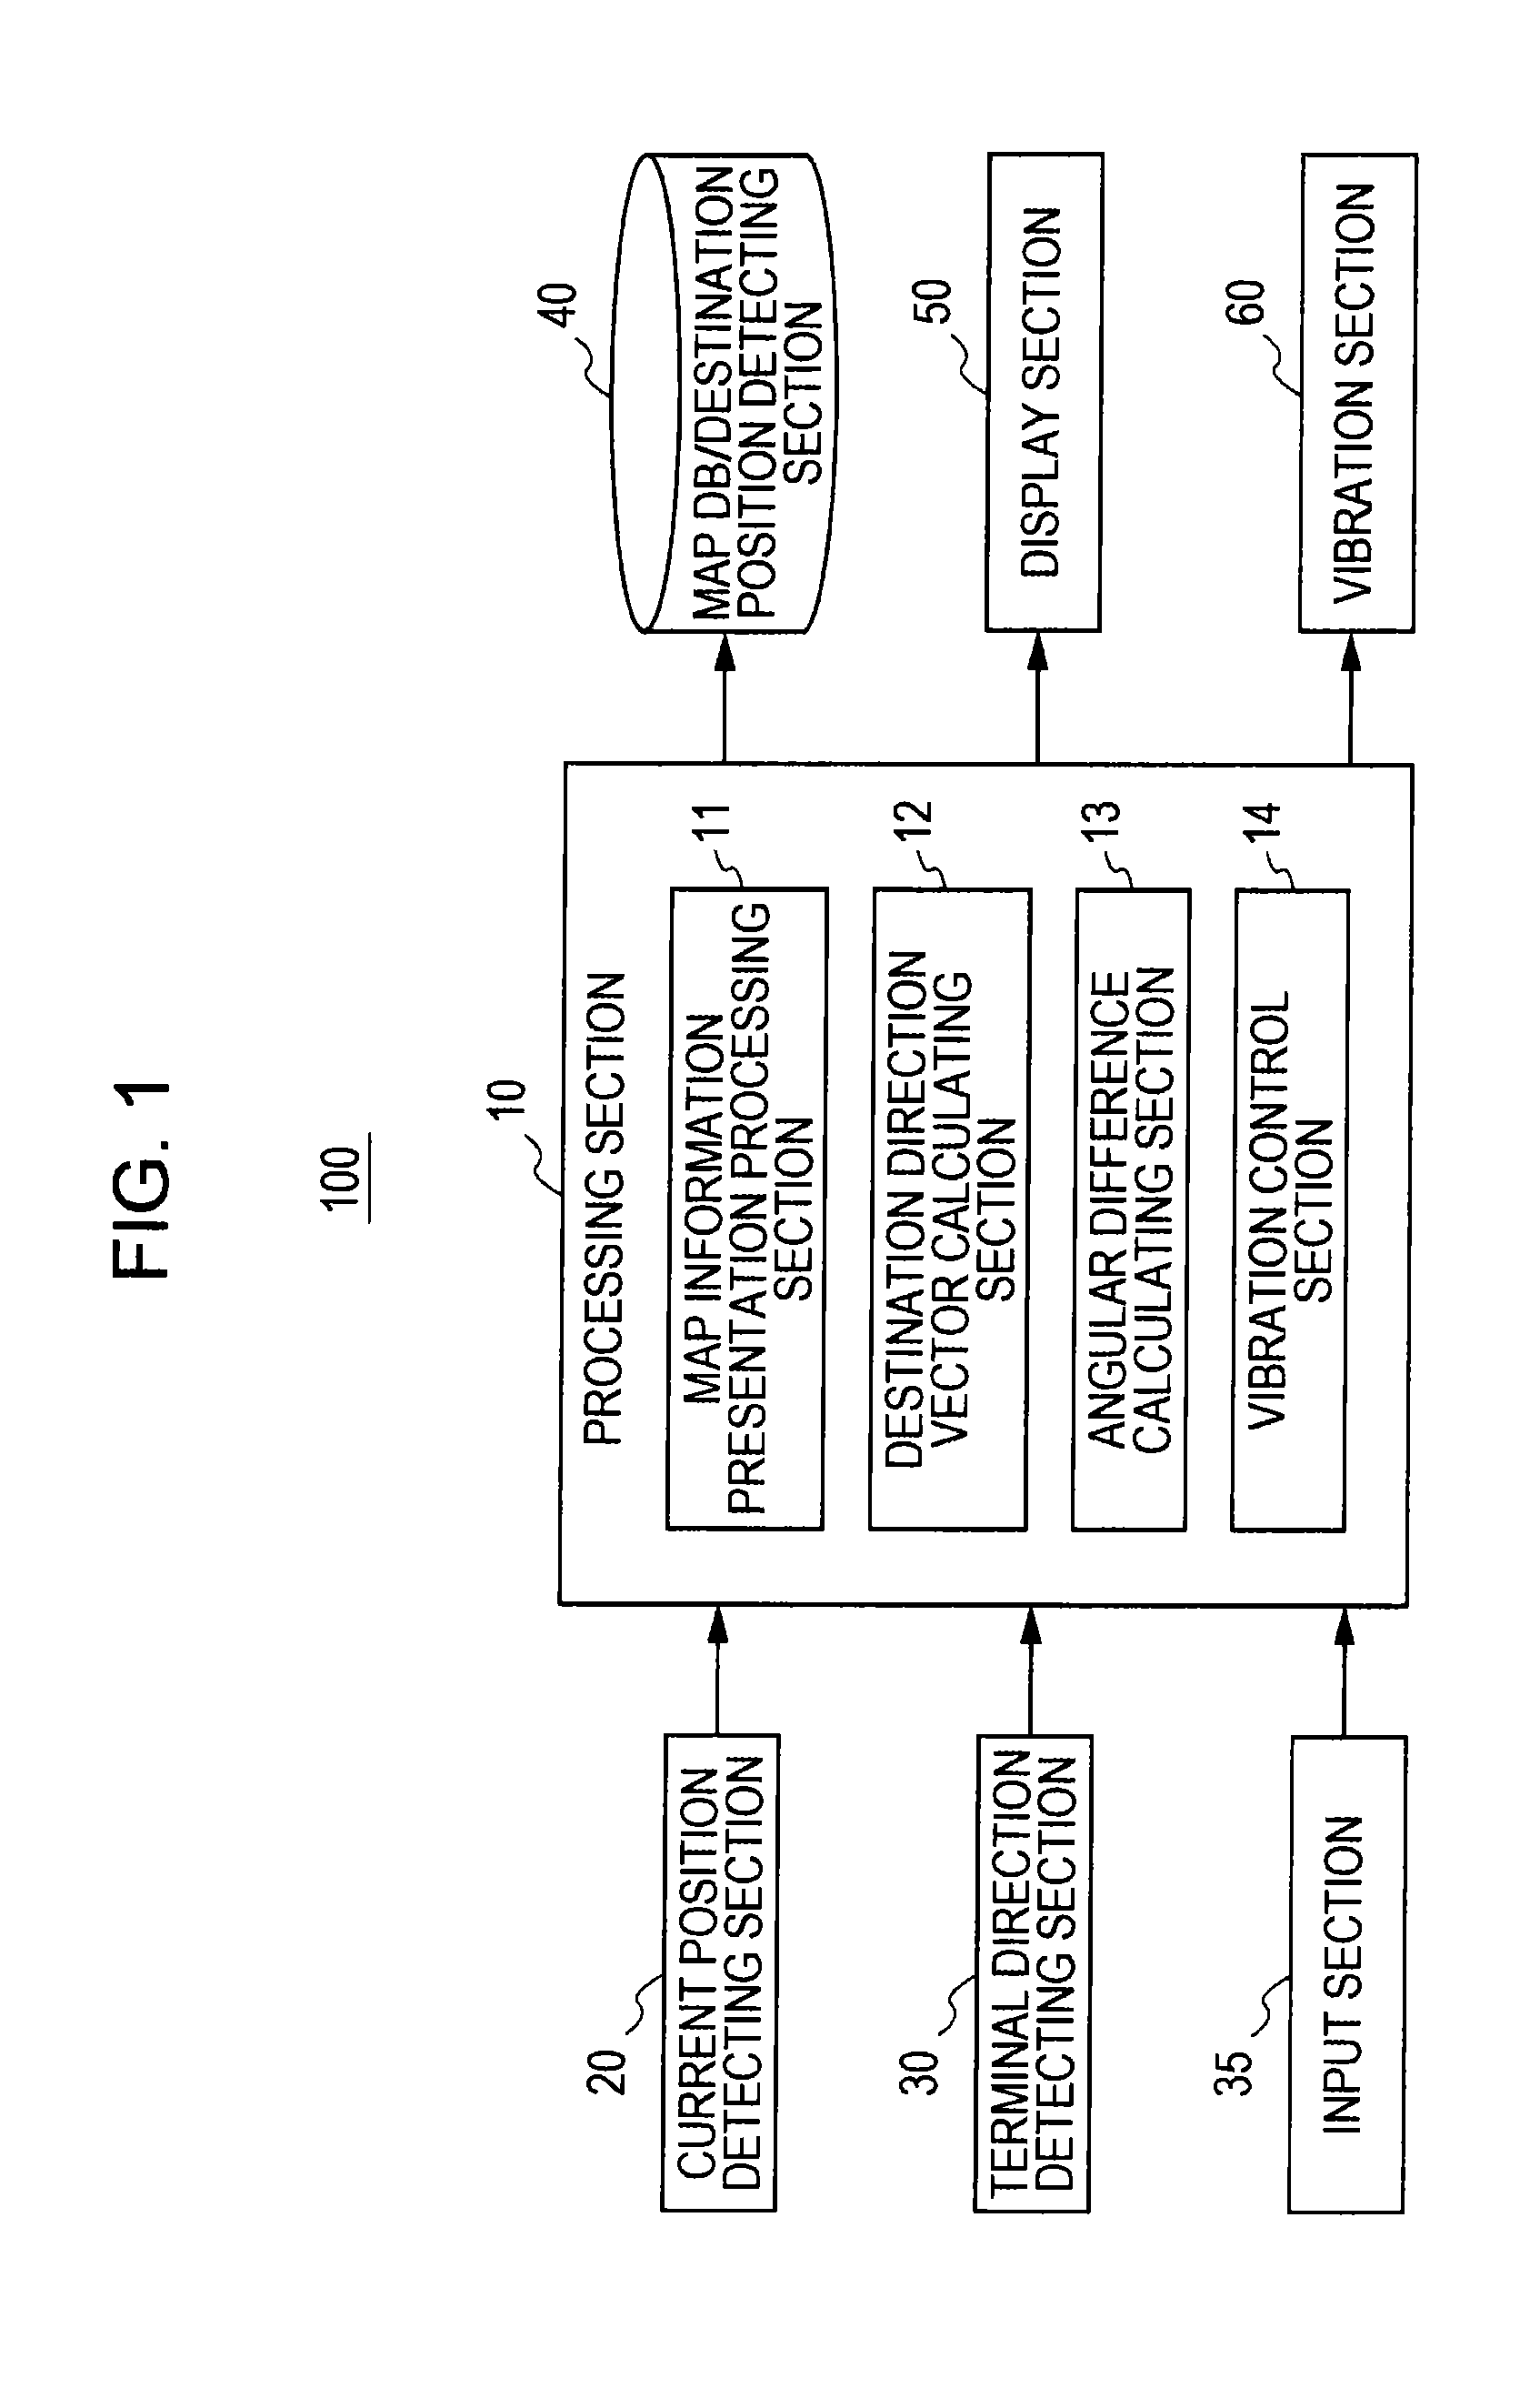 Portable navigation device and method with active elements